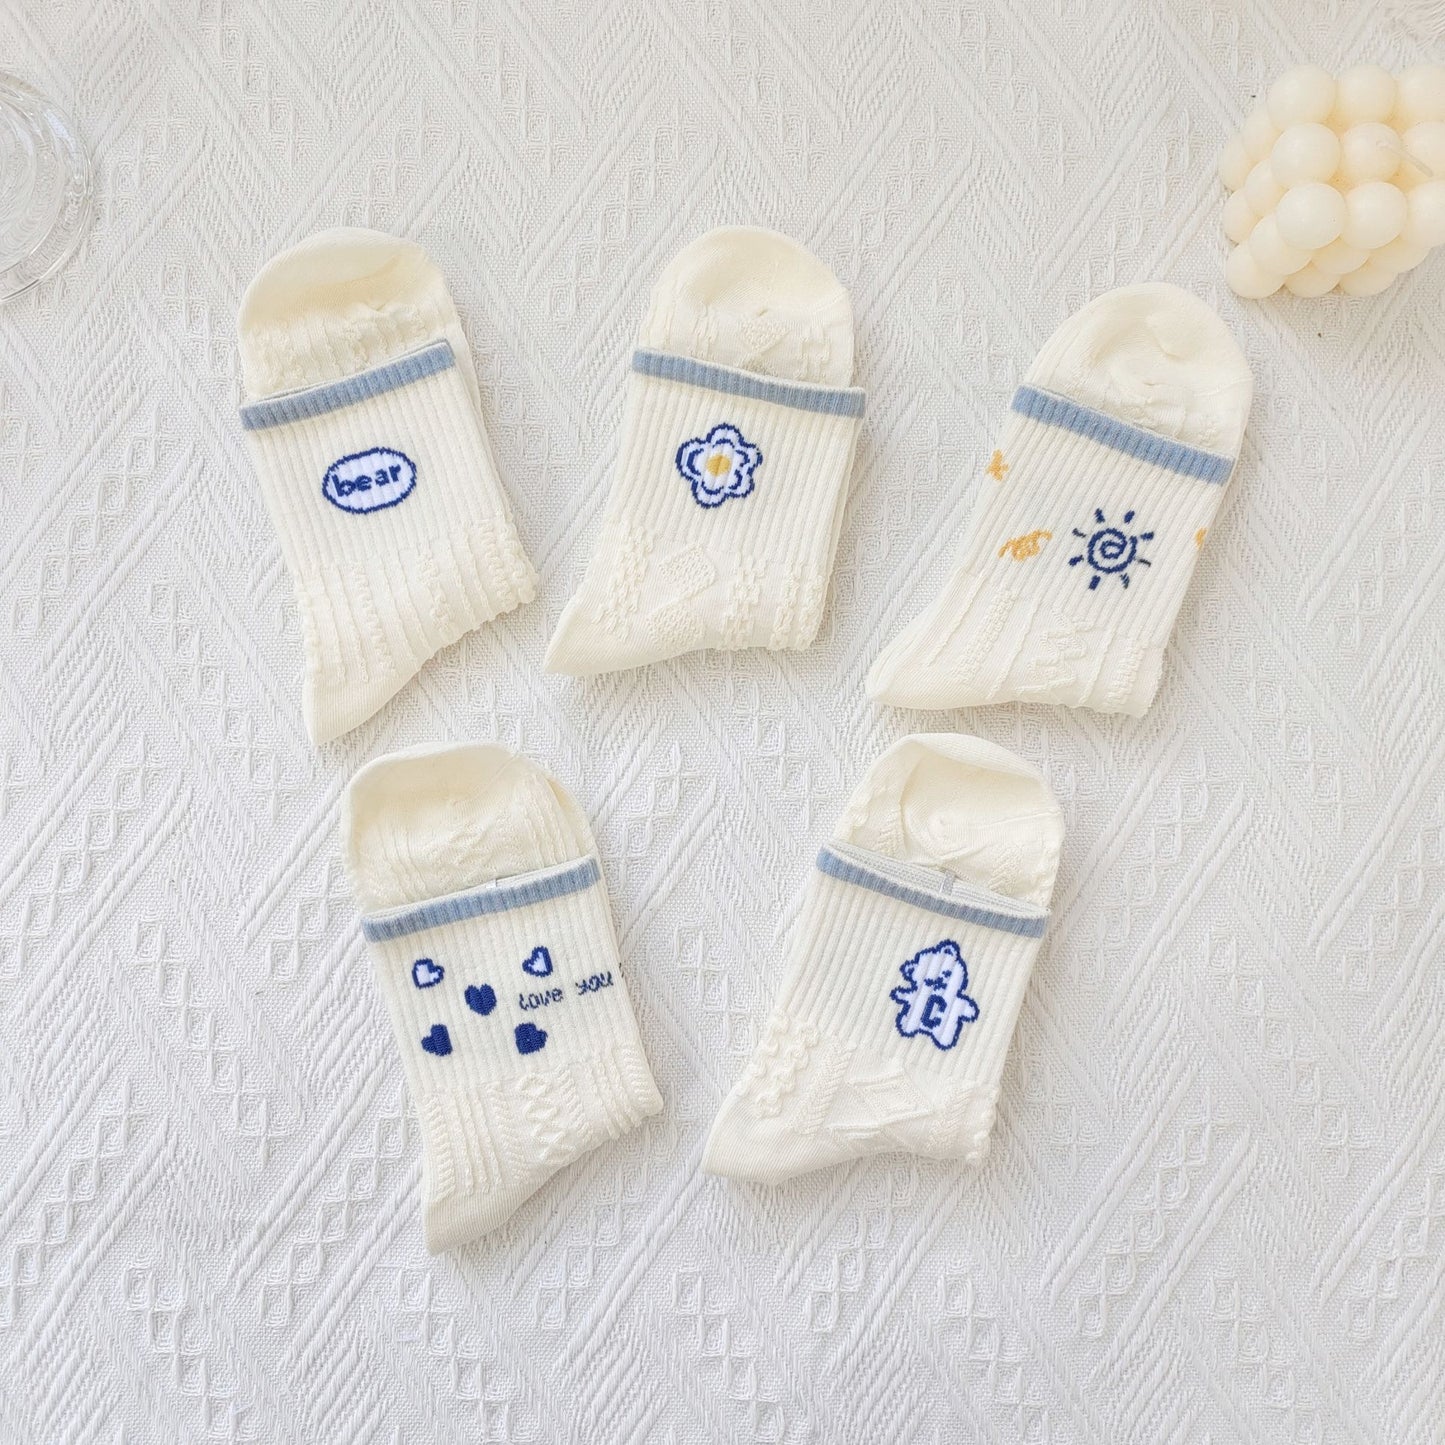 Cottoncomfrot socks in white